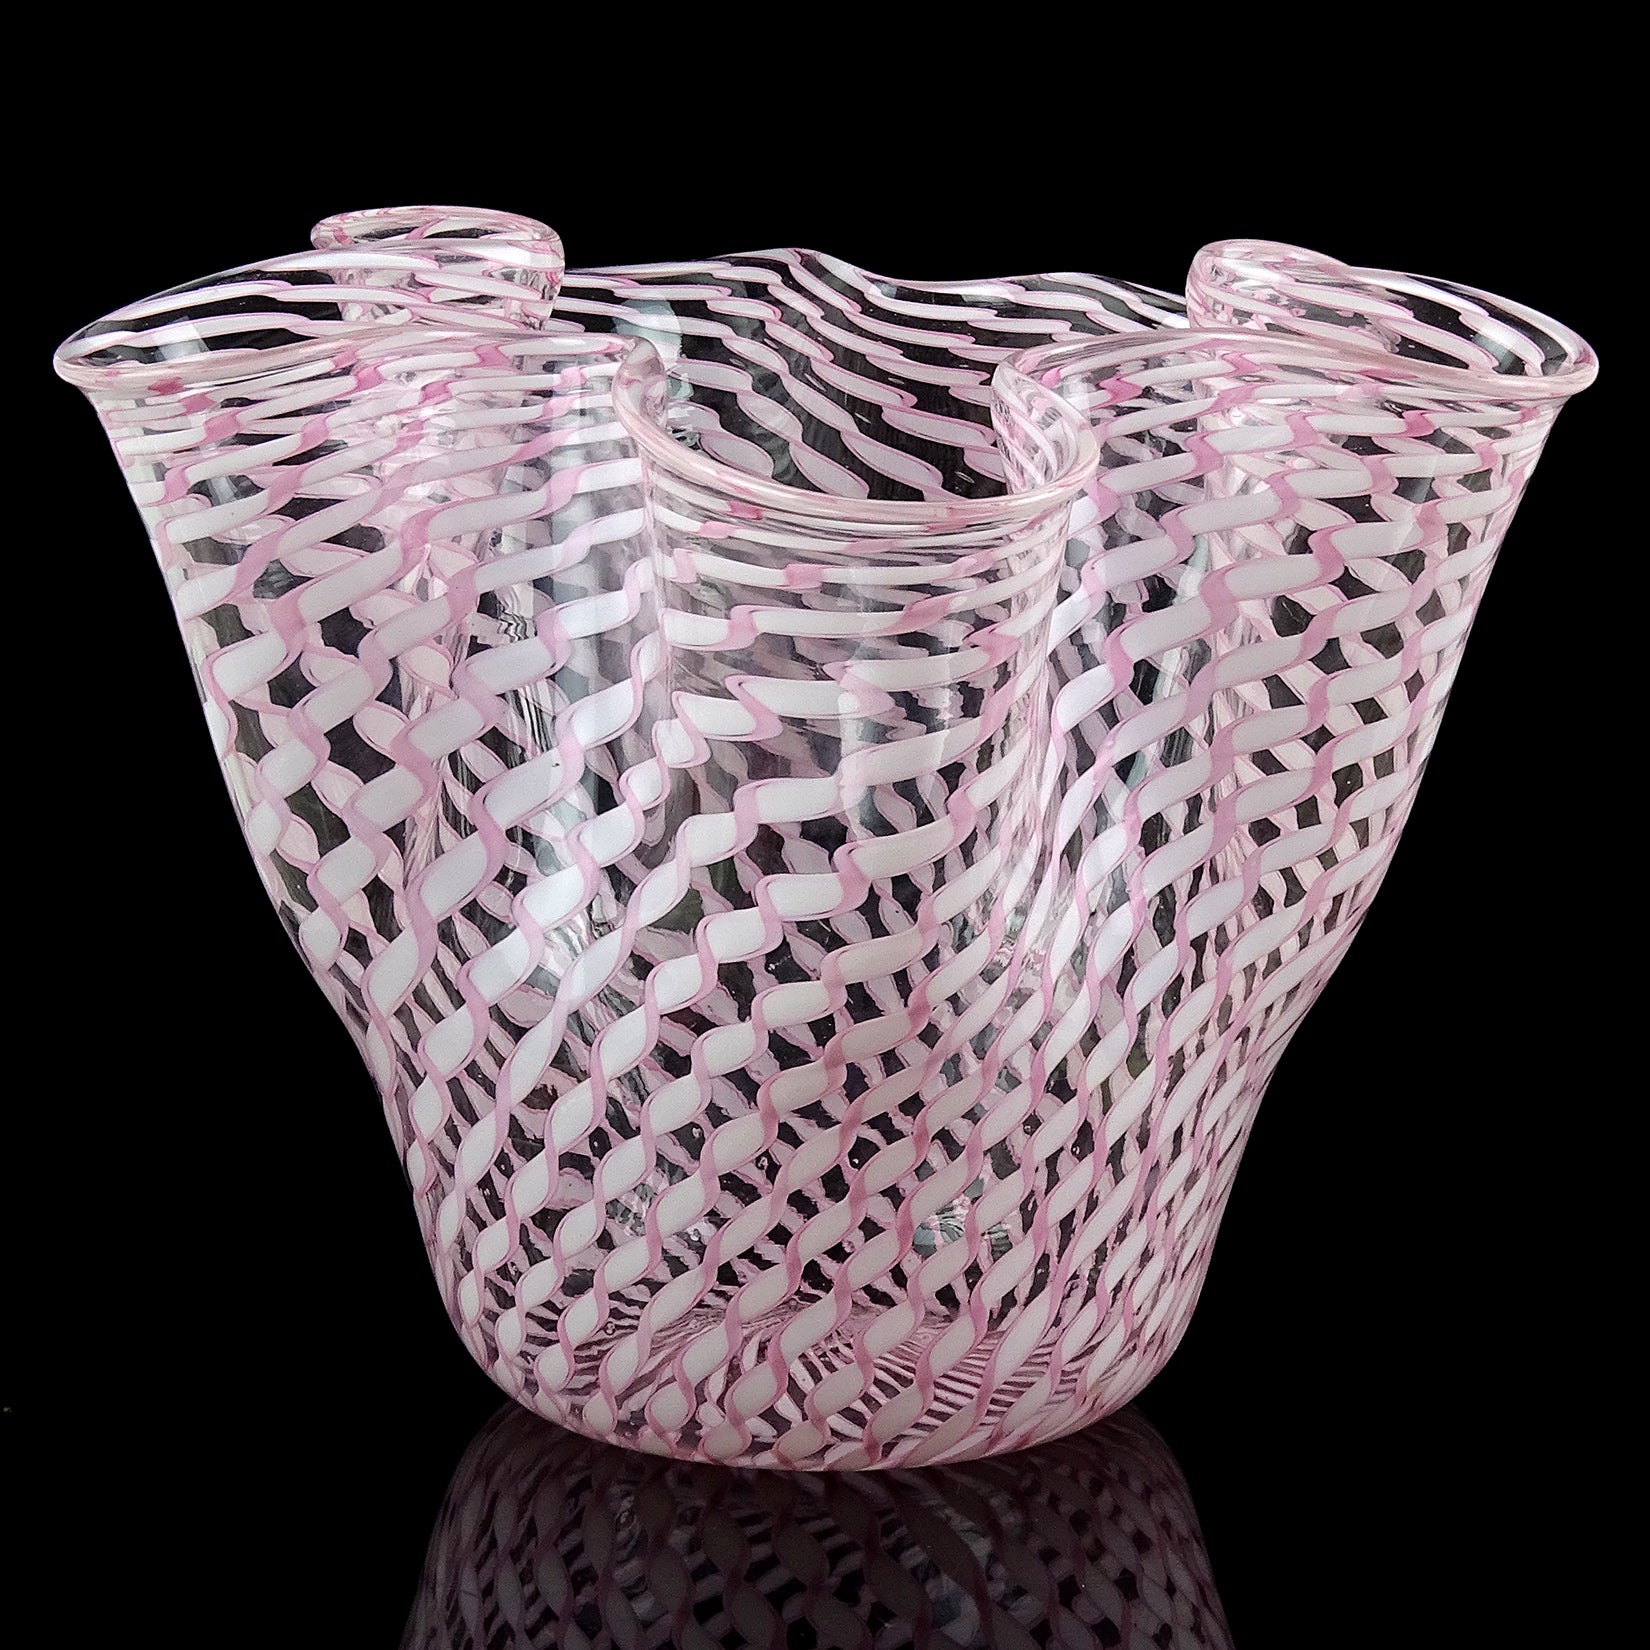 Beautiful vintage Murano hand blown pink and white twisted ribbons Italian art glass handkerchief / fazzoletto vase. Documented to the Fratelli Toso company. Made with twisting latticing pieces and formed into a vase. Would make a great display